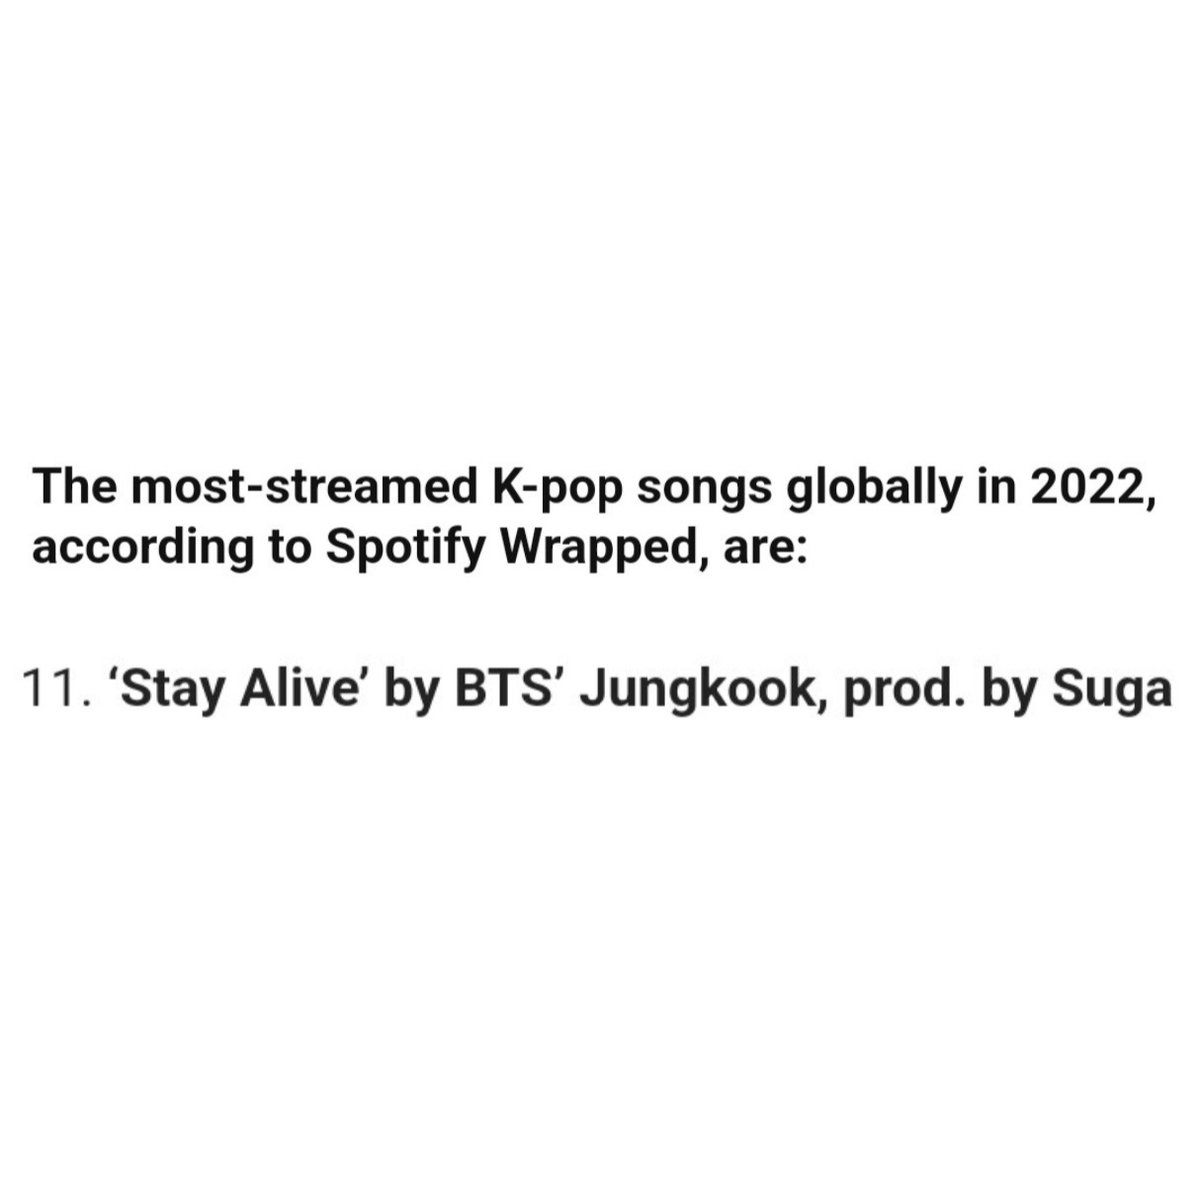 CONGRATULATIONS JUNGKOOK & SUGA for ‘Stay Alive (Prod. SUGA of BTS)’ being Spotify Wrapped 11th most-streamed K-Pop song globally in 2022!!

CONGRATULATIONS JUNGKOOK
CONGRATULATIONS SUGA
#StayAlive_CHAKHO
#JUNGKOOK #정국 #BTSJUNGKOOK
#SUGA #슈가 #BTSSUGA
#BTS #방탄소년단
@BTS_twt